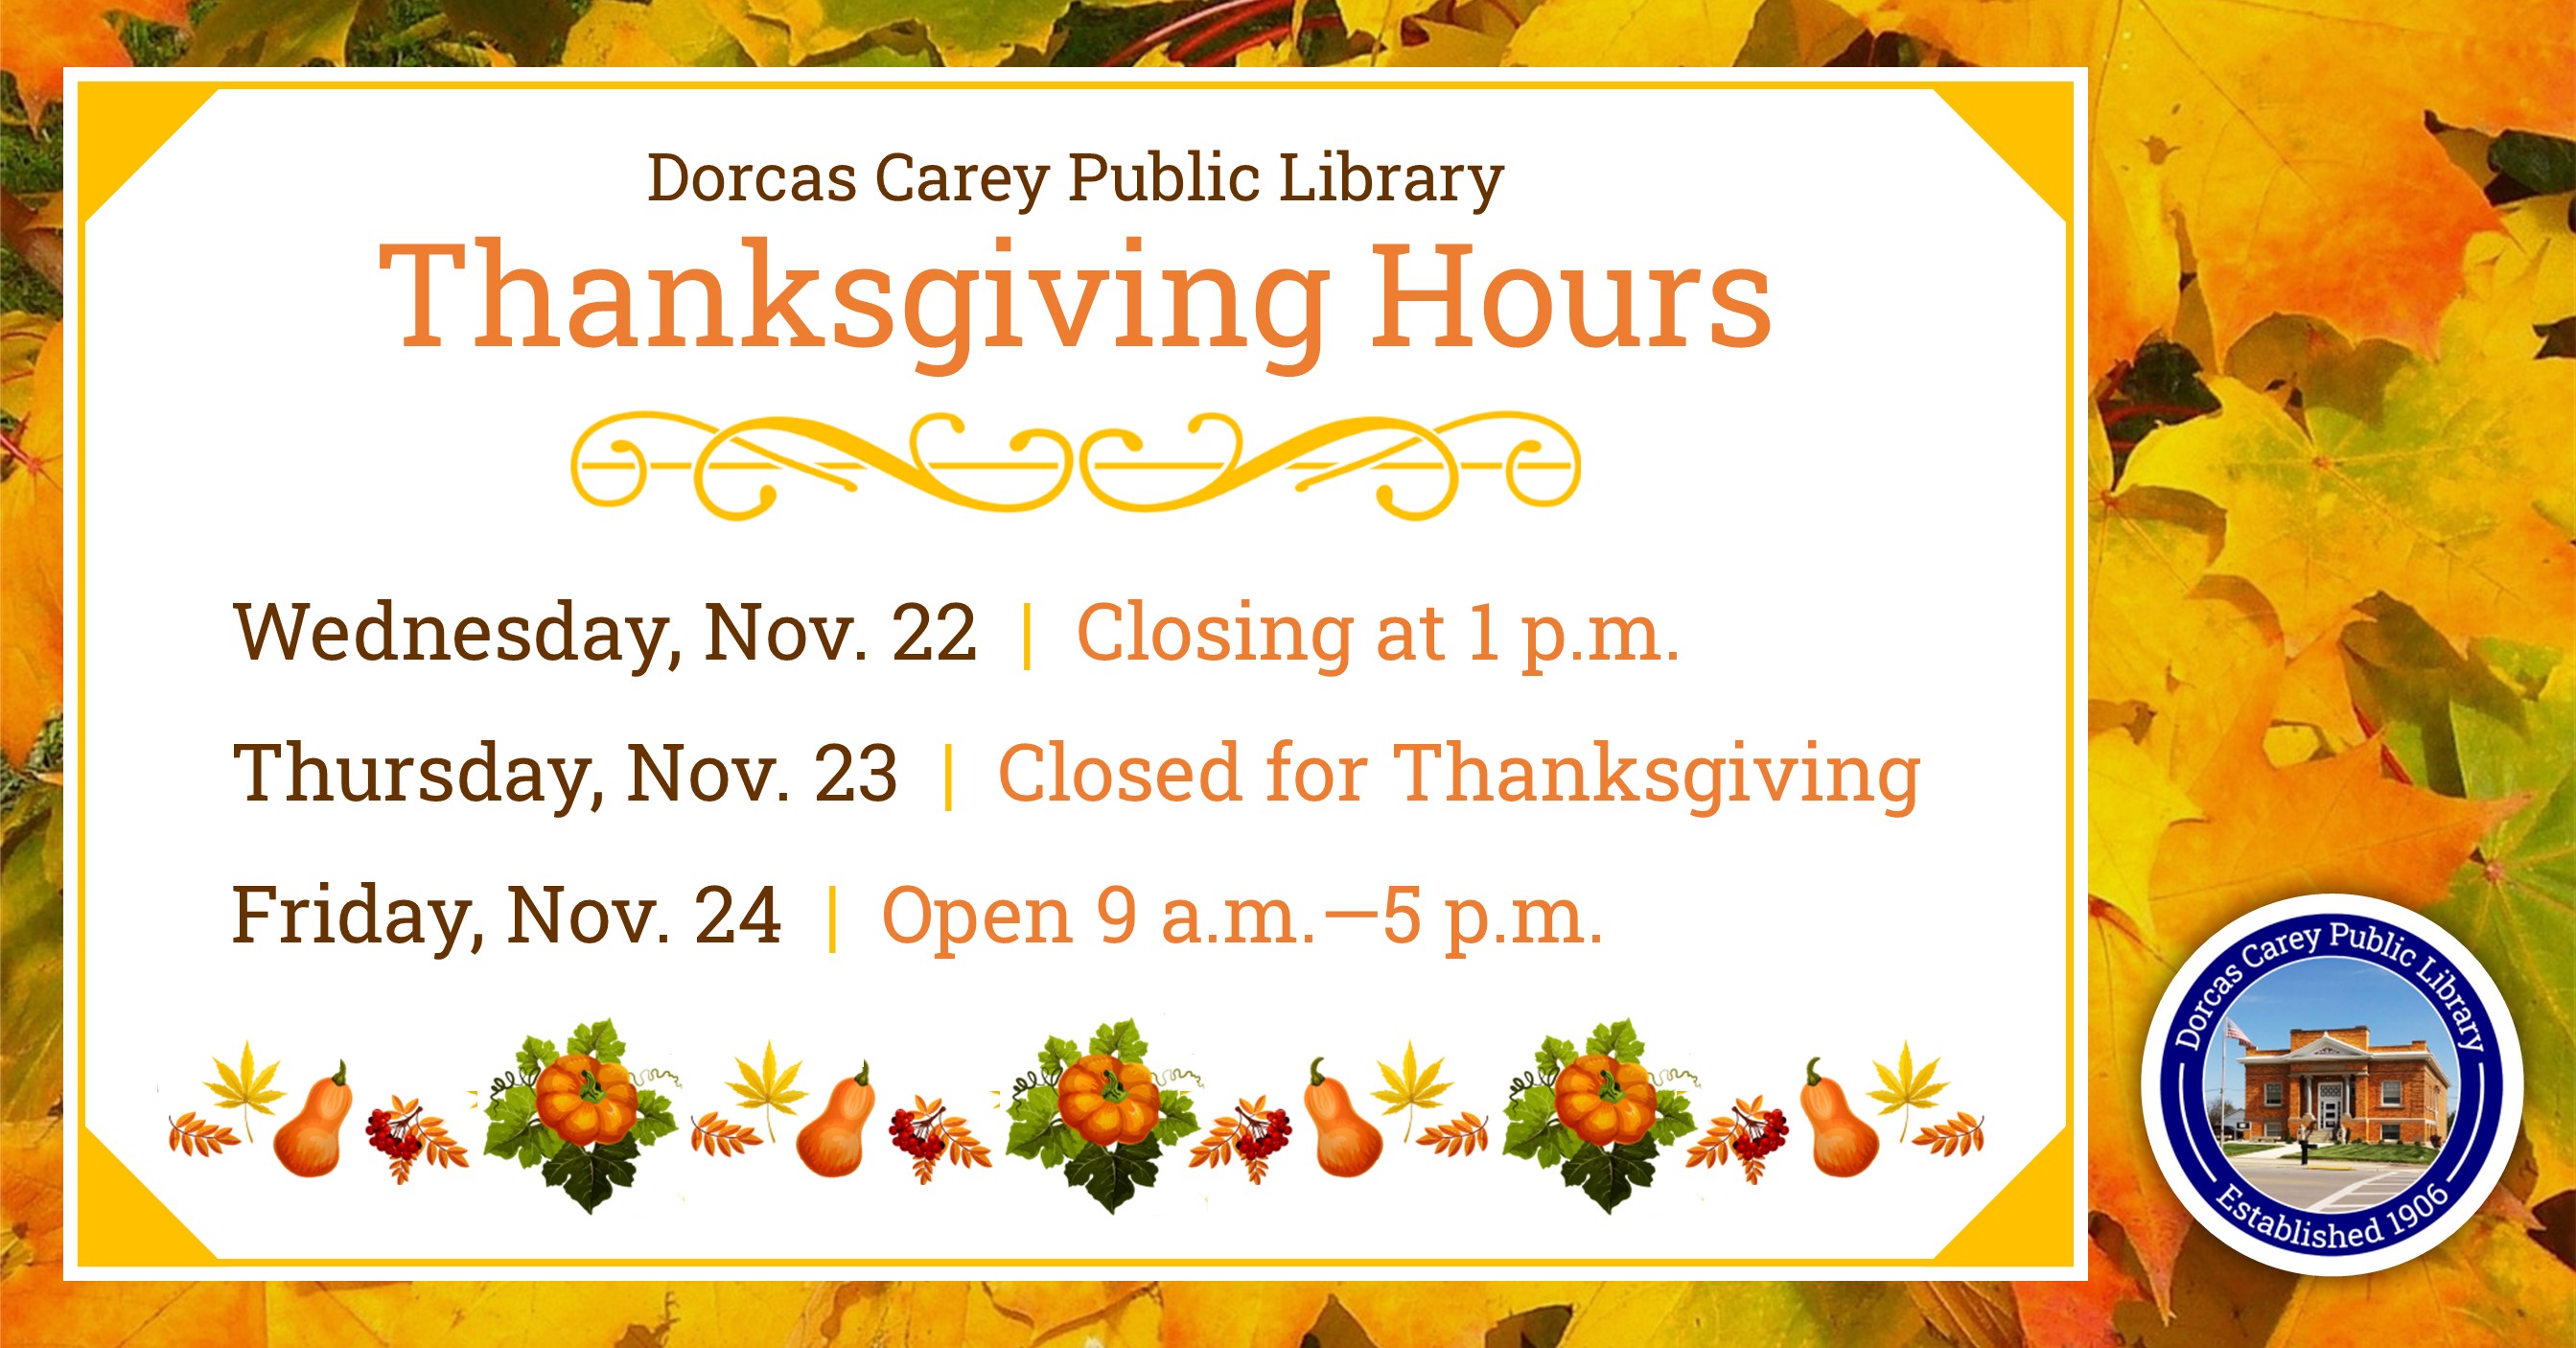 The library will be closing at 1 p.m. on Wednesday, November 22nd in observance of Thanksgiving.  Visit us online at www.dorcascarey.org for your library needs.